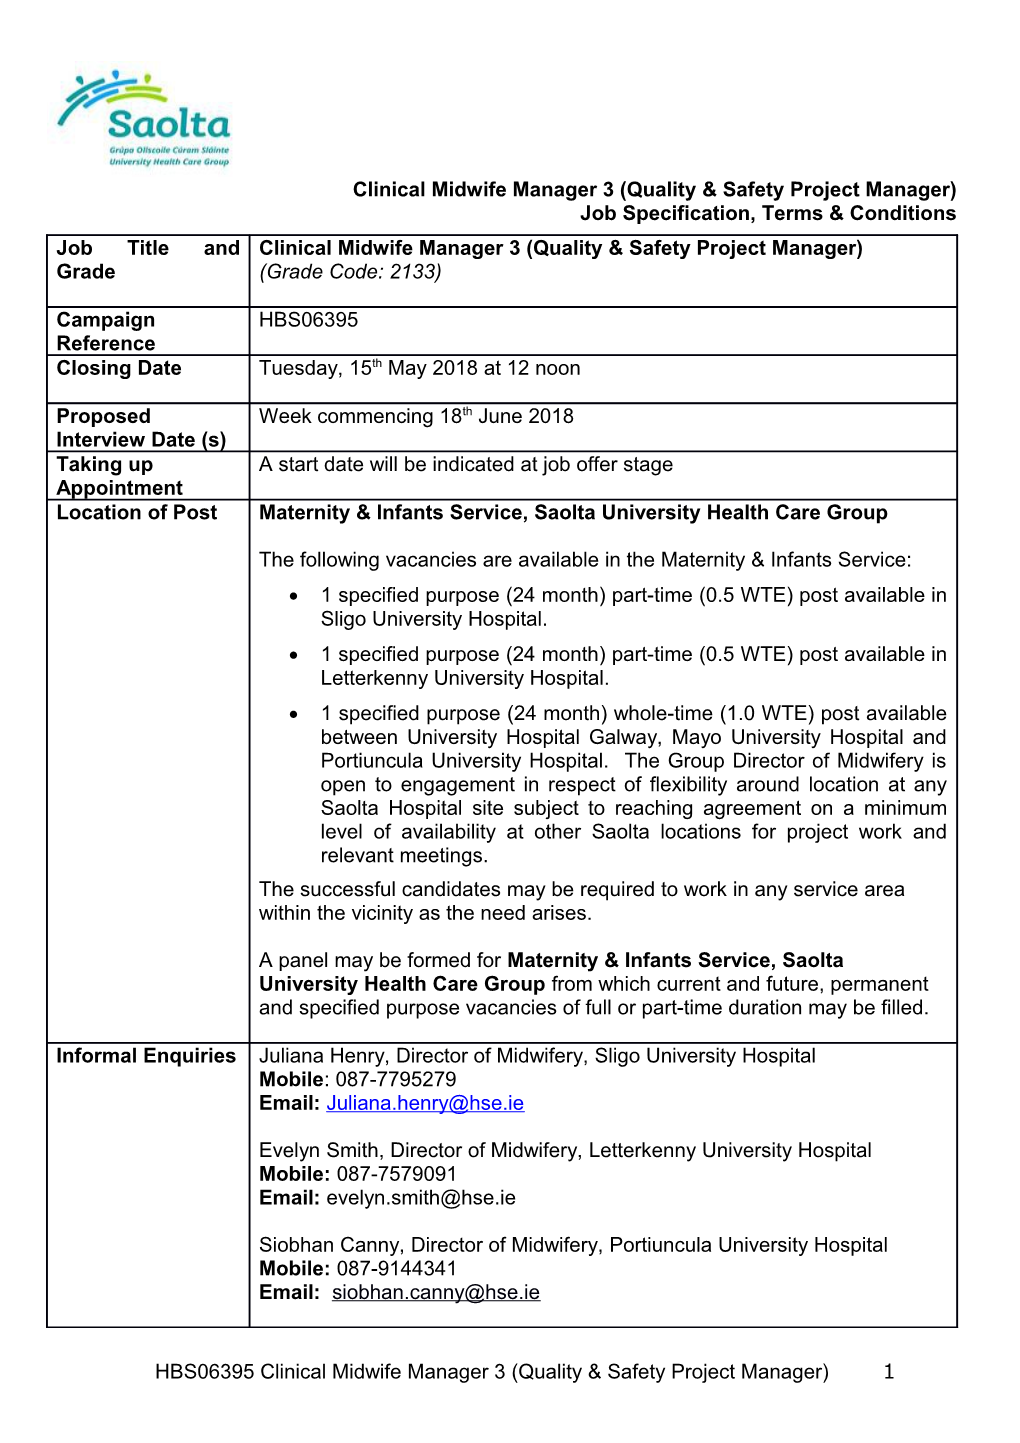 Clinical Midwife Manager 3(Quality & Safety Project Manager)